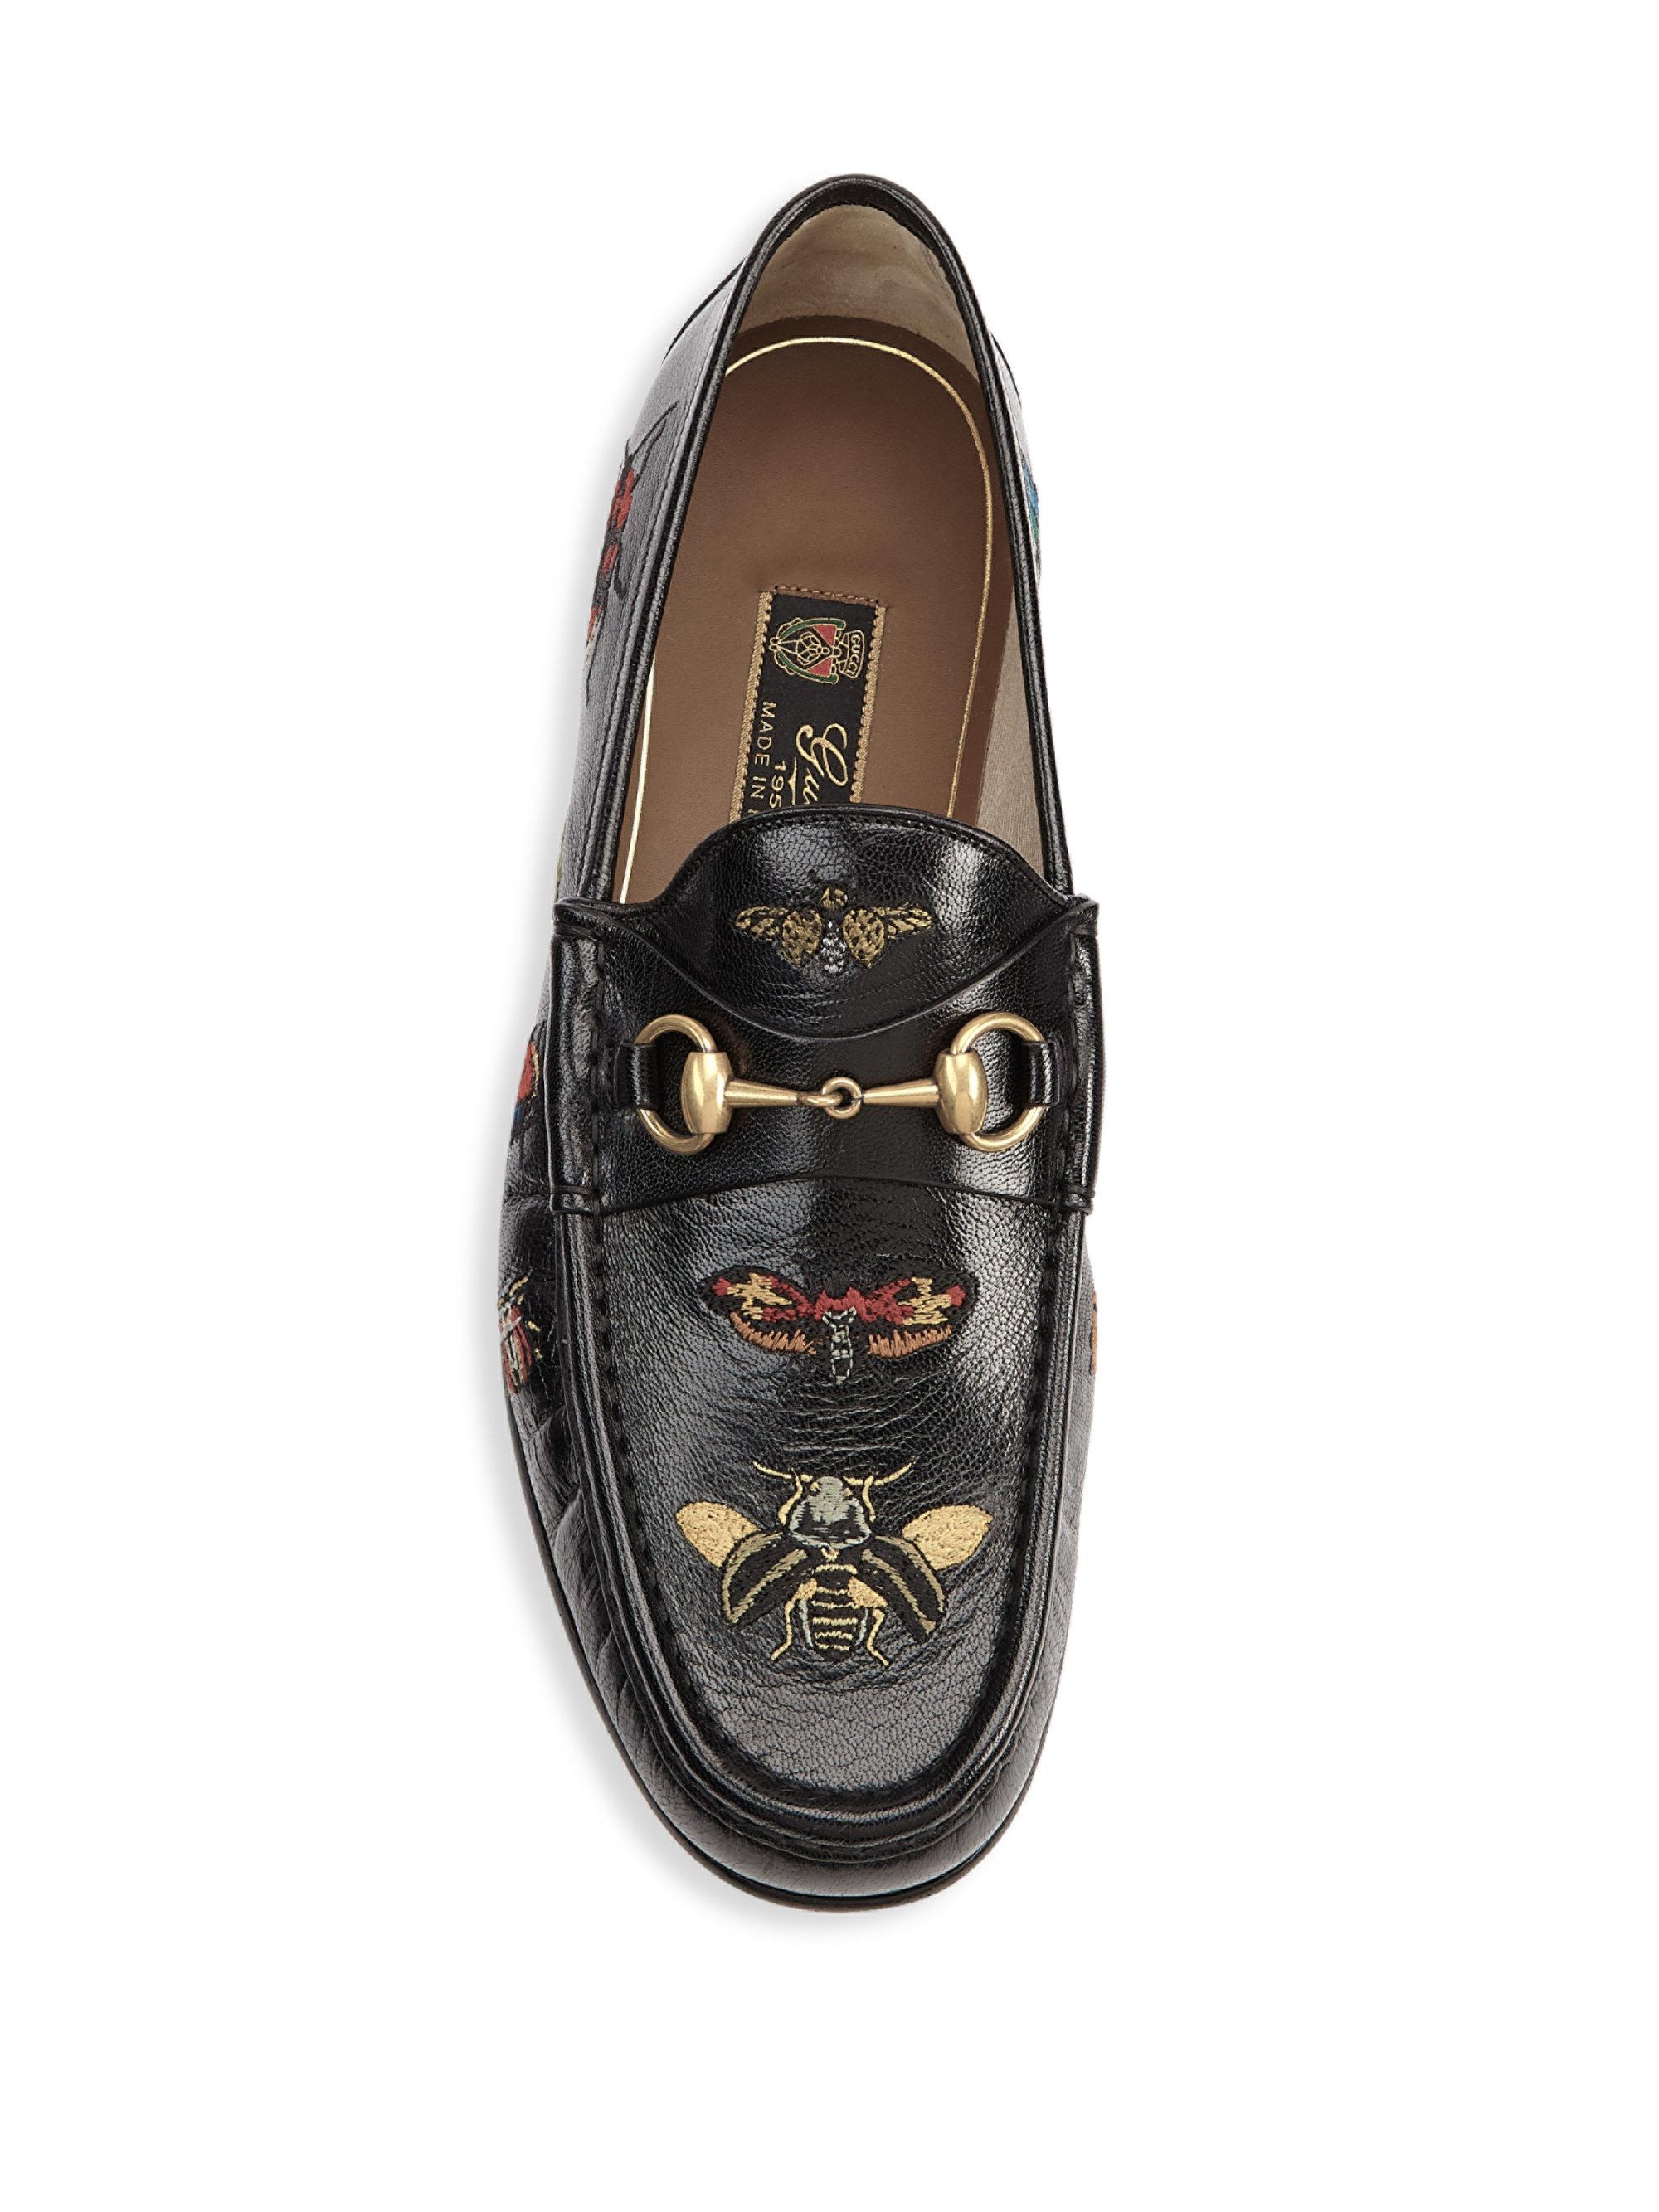 Gucci Roos Insect Motif Leather Moccasinloafers in Black - Lyst